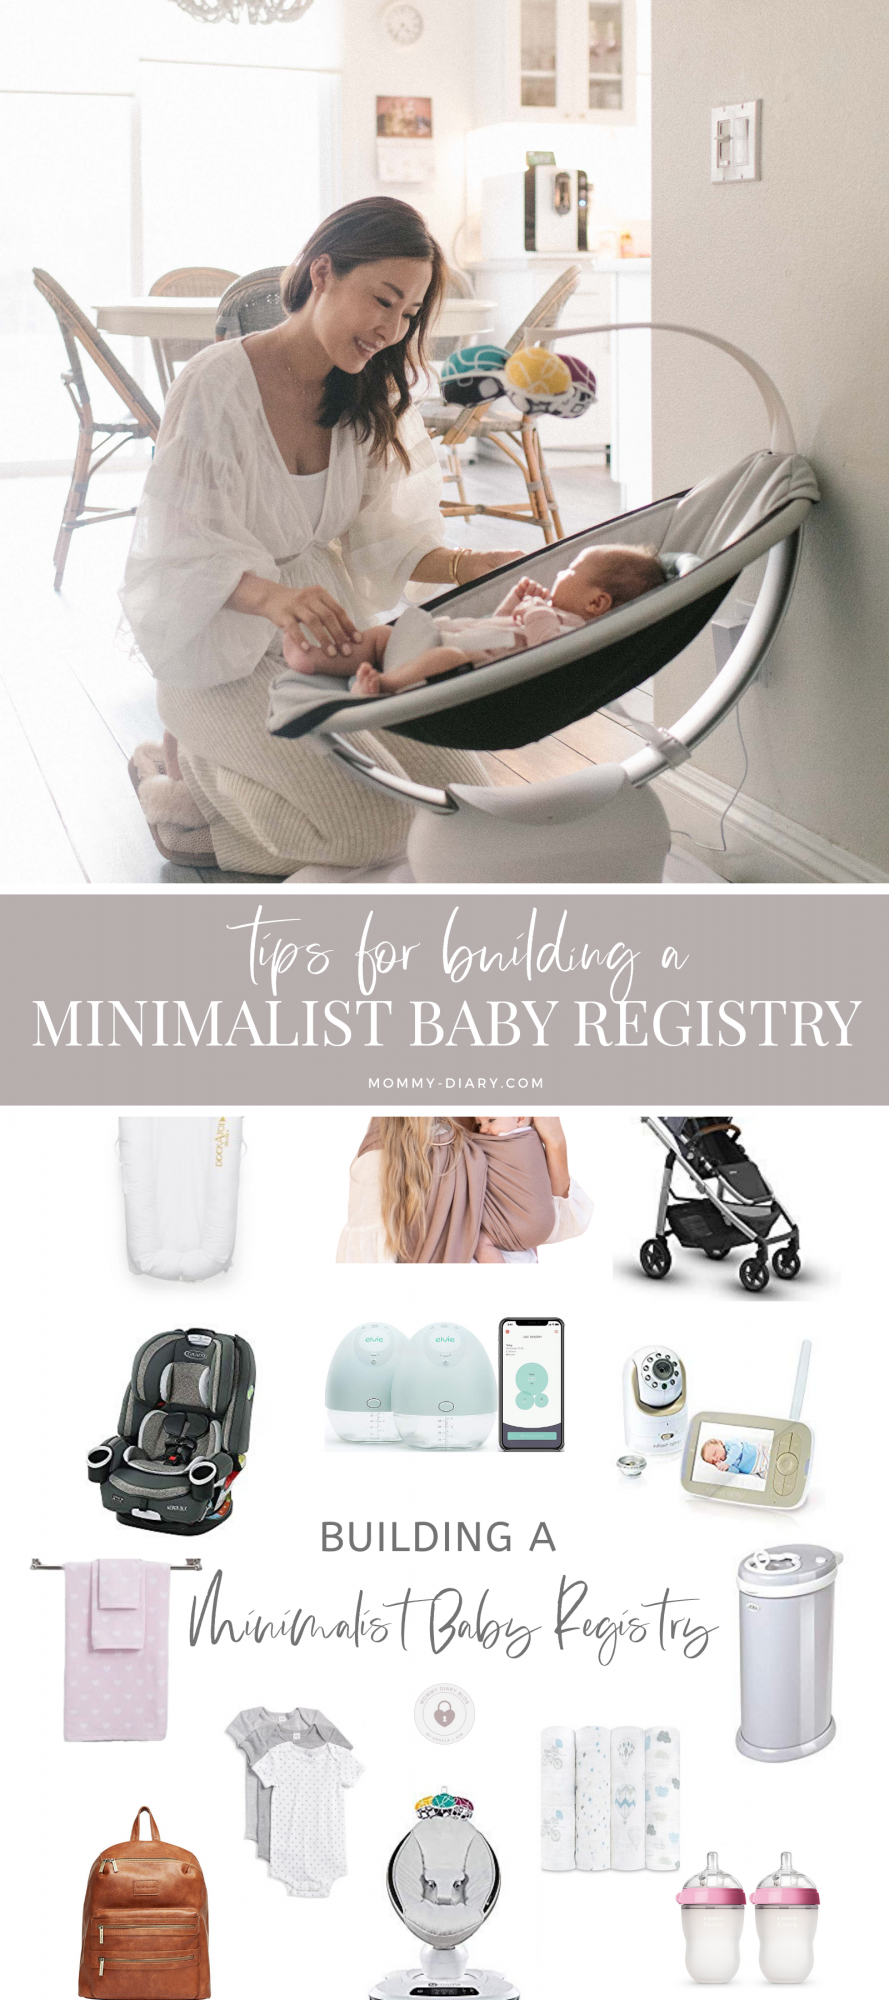 tips for building minimalist baby registry